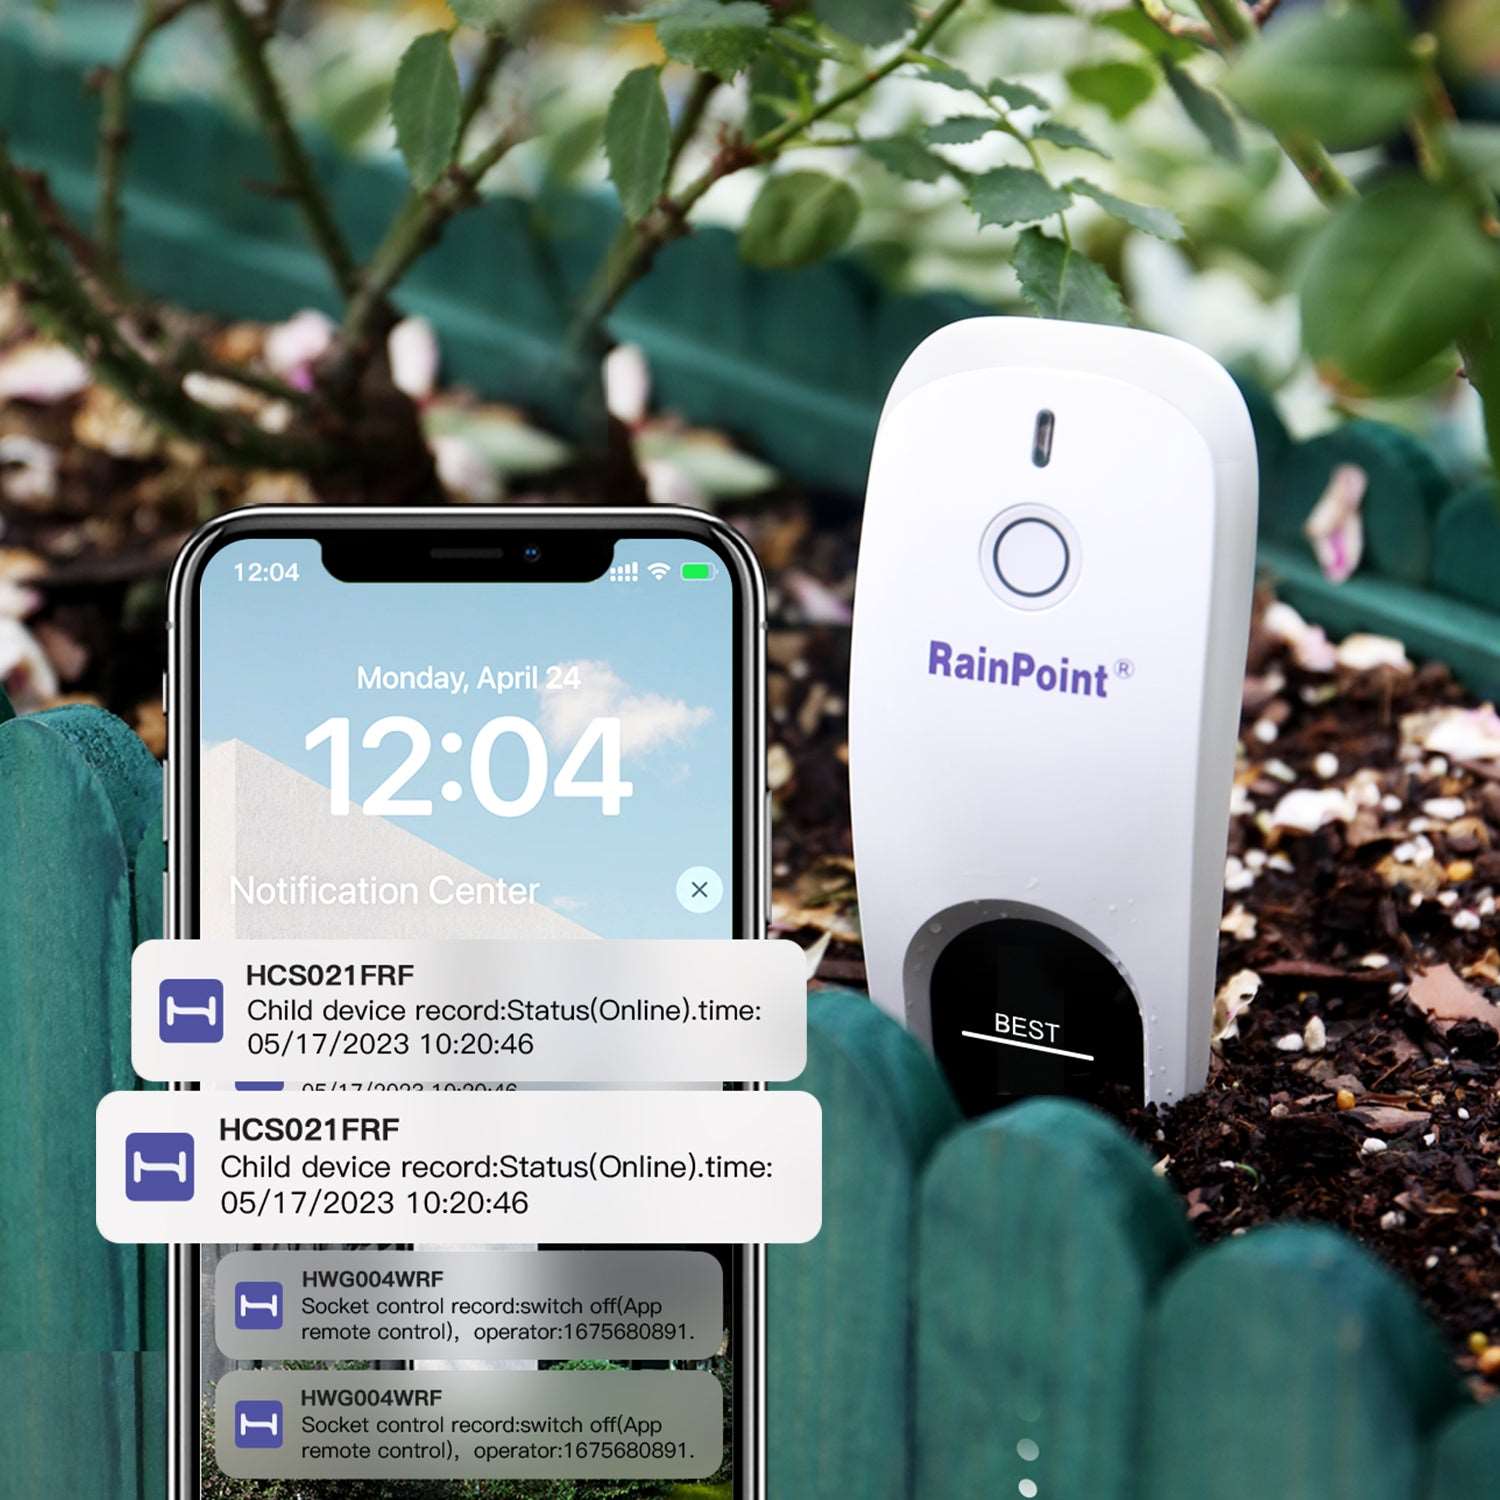 When pairedwith a soil sensor, each zone can be connected to a corresponding soil sensor separately,and each zone can even automatically control water based on soil moisture.